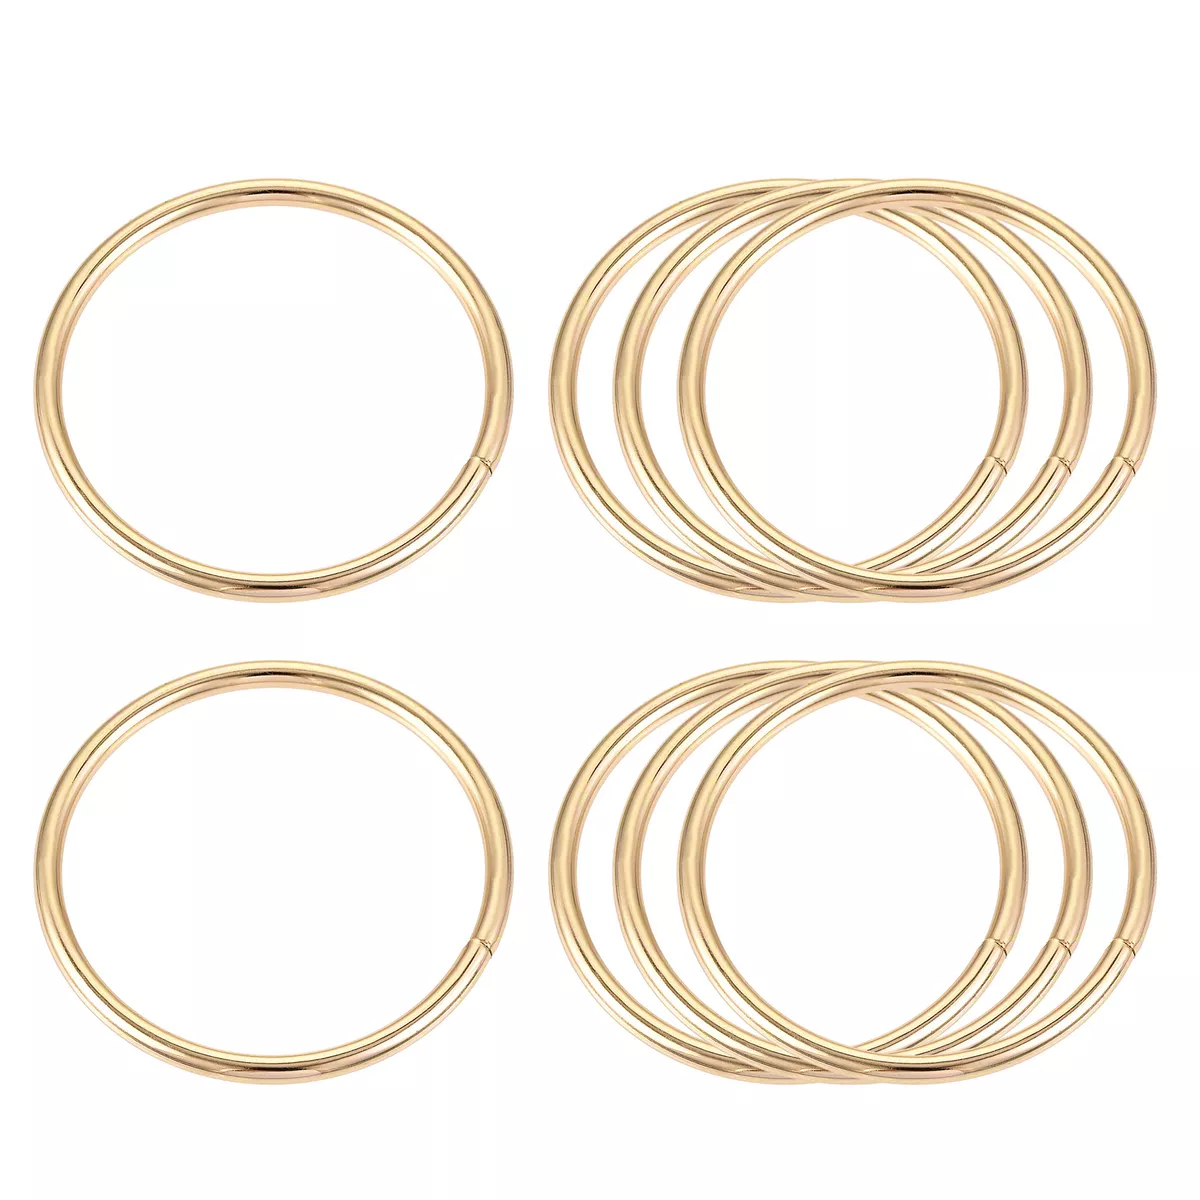 Thickness 1mm, Food Grade Silicone O-Ring, Outer Dia Ø 5mm - 50mm, O Rings  Seals | eBay